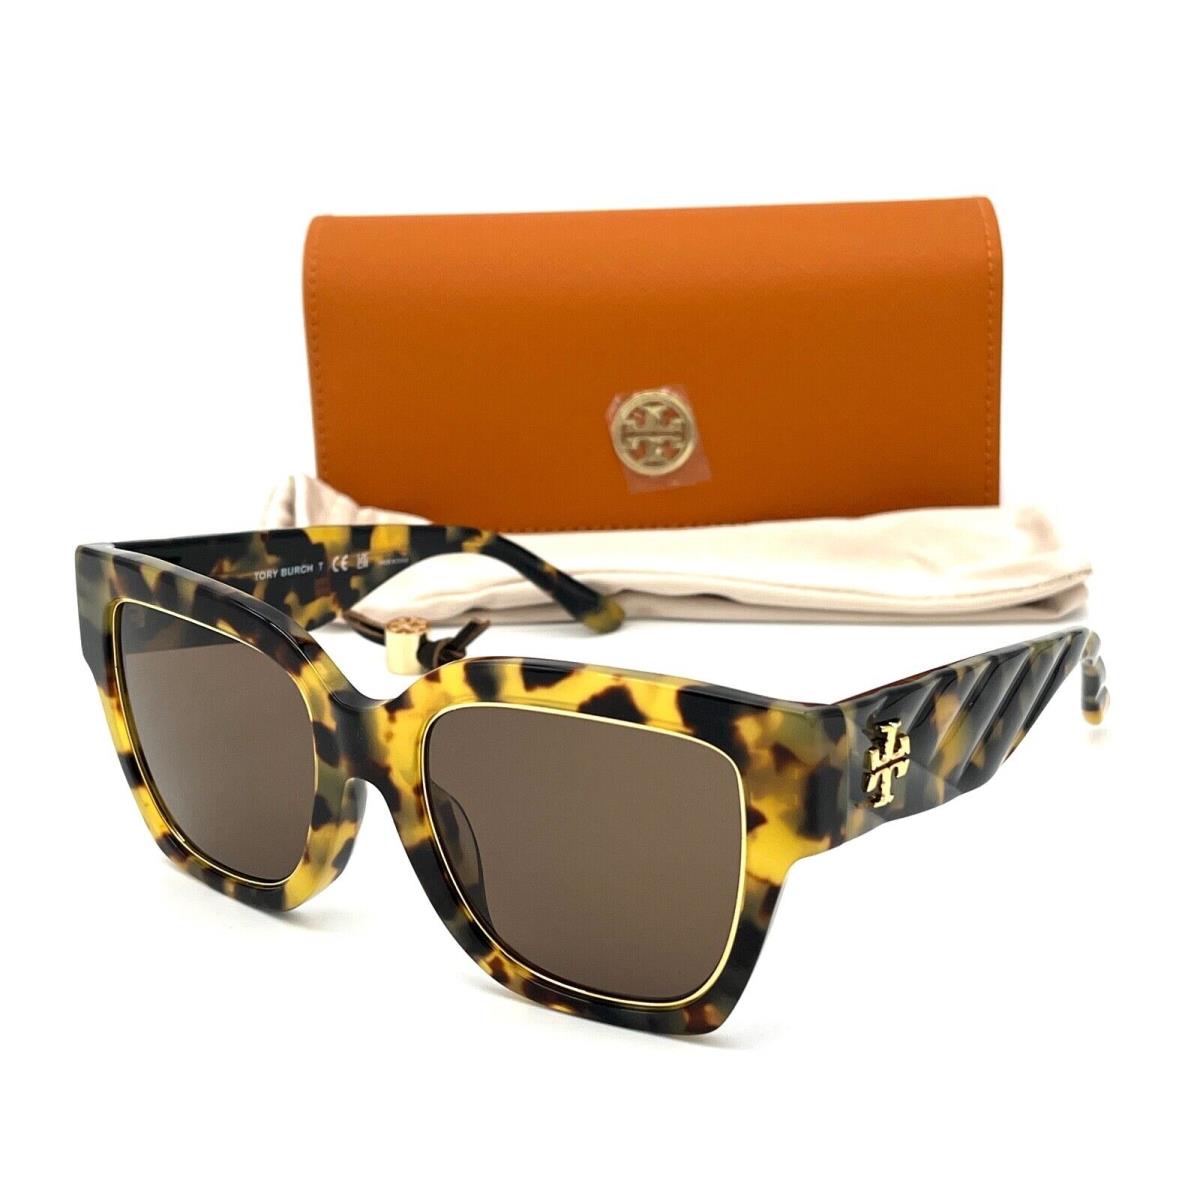 Tory Burch TY7189 147473 Tokyo Tortoise / Solid Brown 52mm Sunglasses